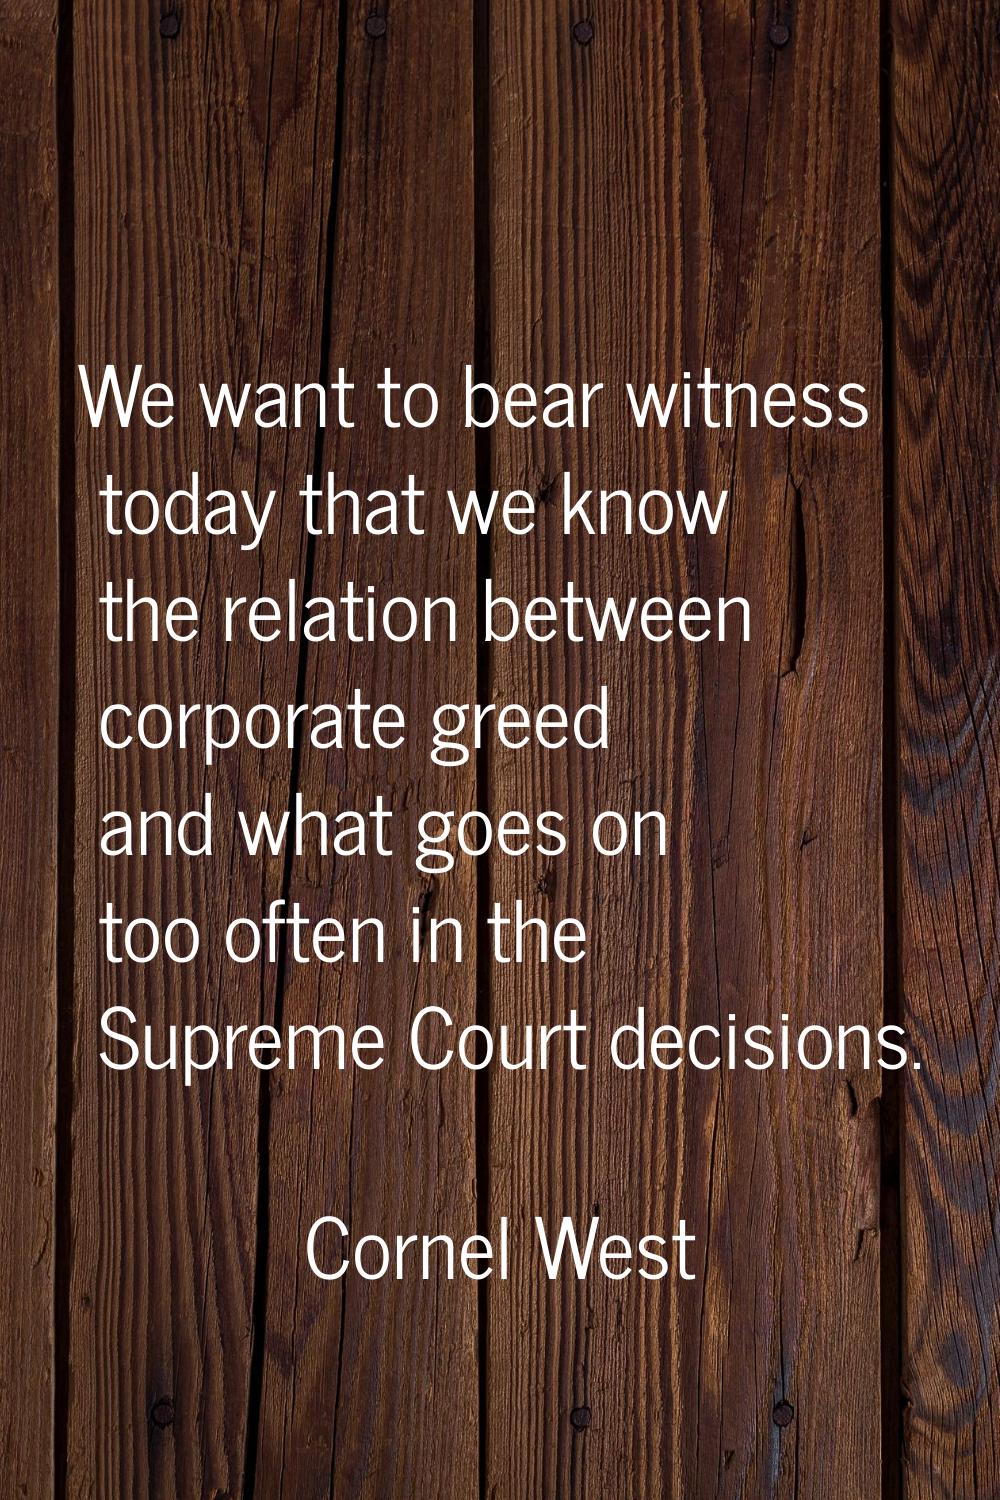 We want to bear witness today that we know the relation between corporate greed and what goes on to